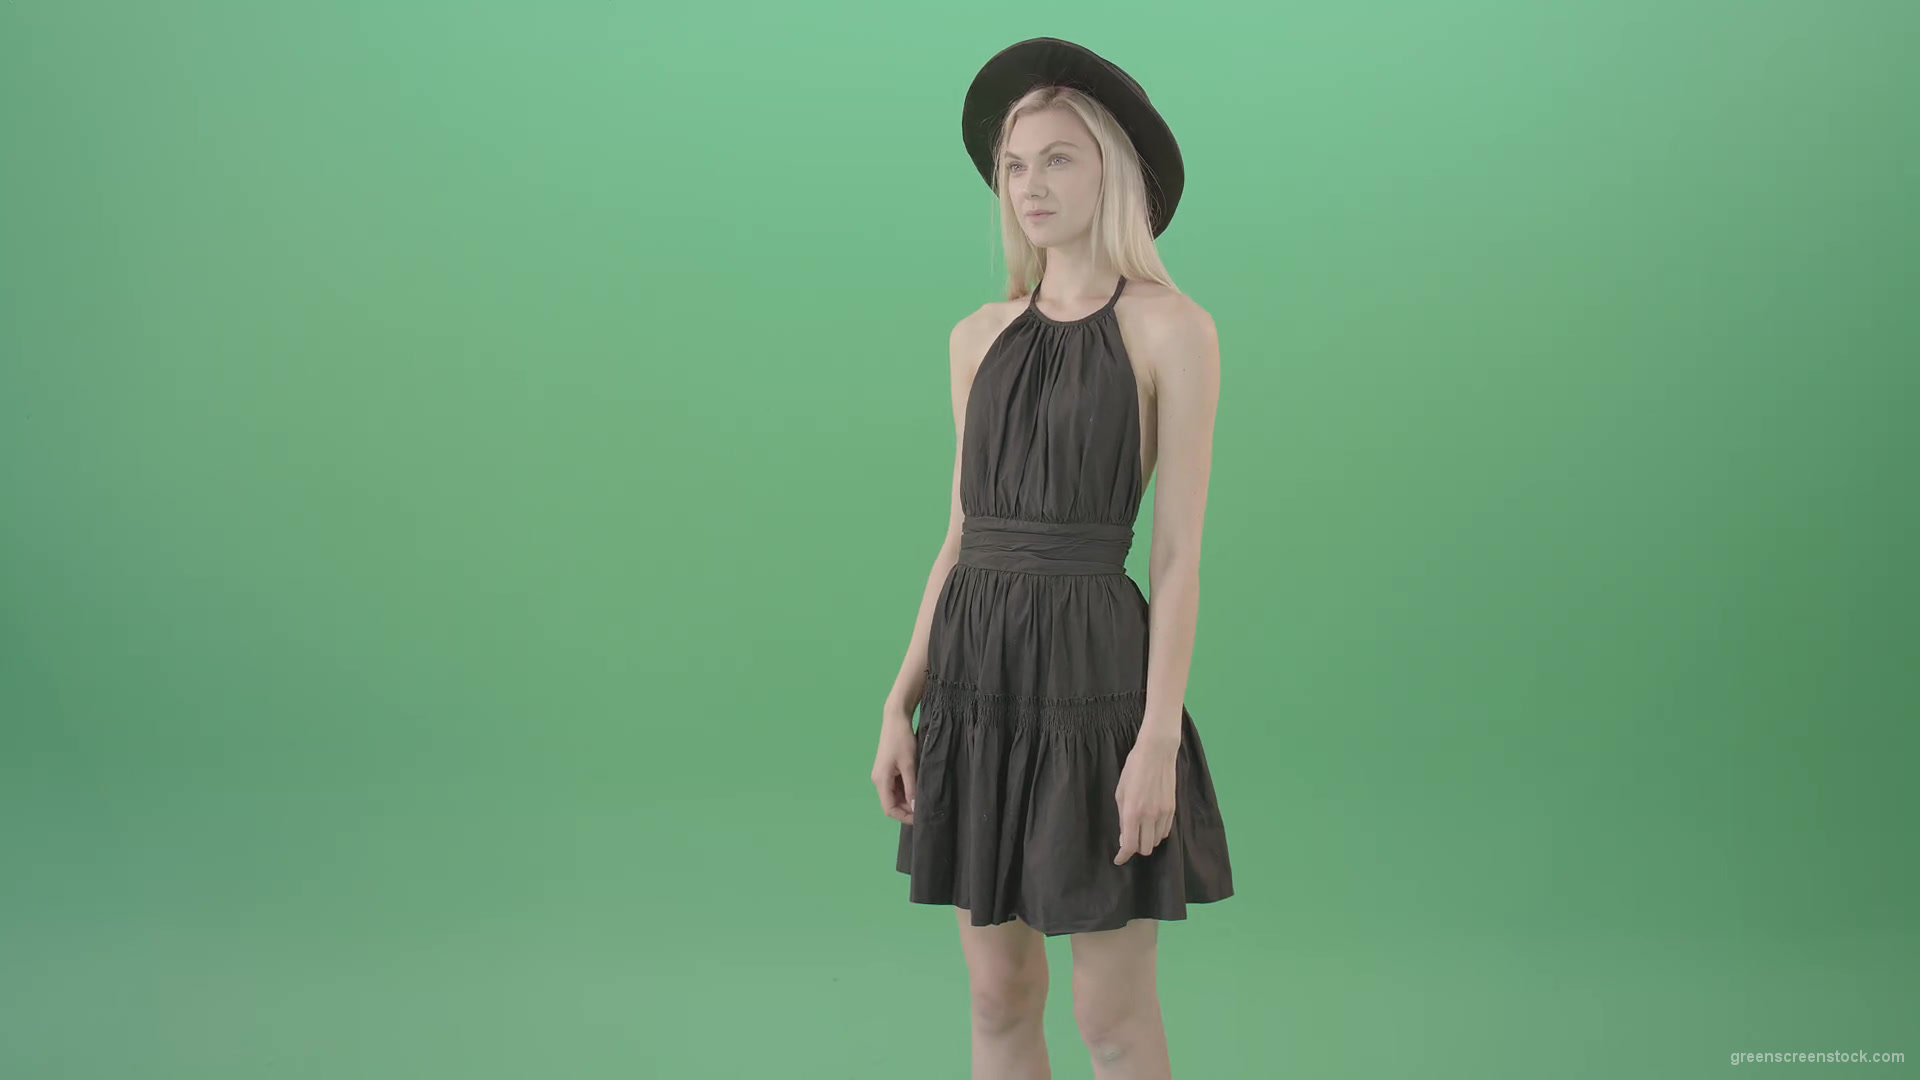 Happy-wow-effect-blonde-girl-slides-products-on-internet-on-touch-screen-4K-Green-Screen-Video-Footage-1920_002 Green Screen Stock